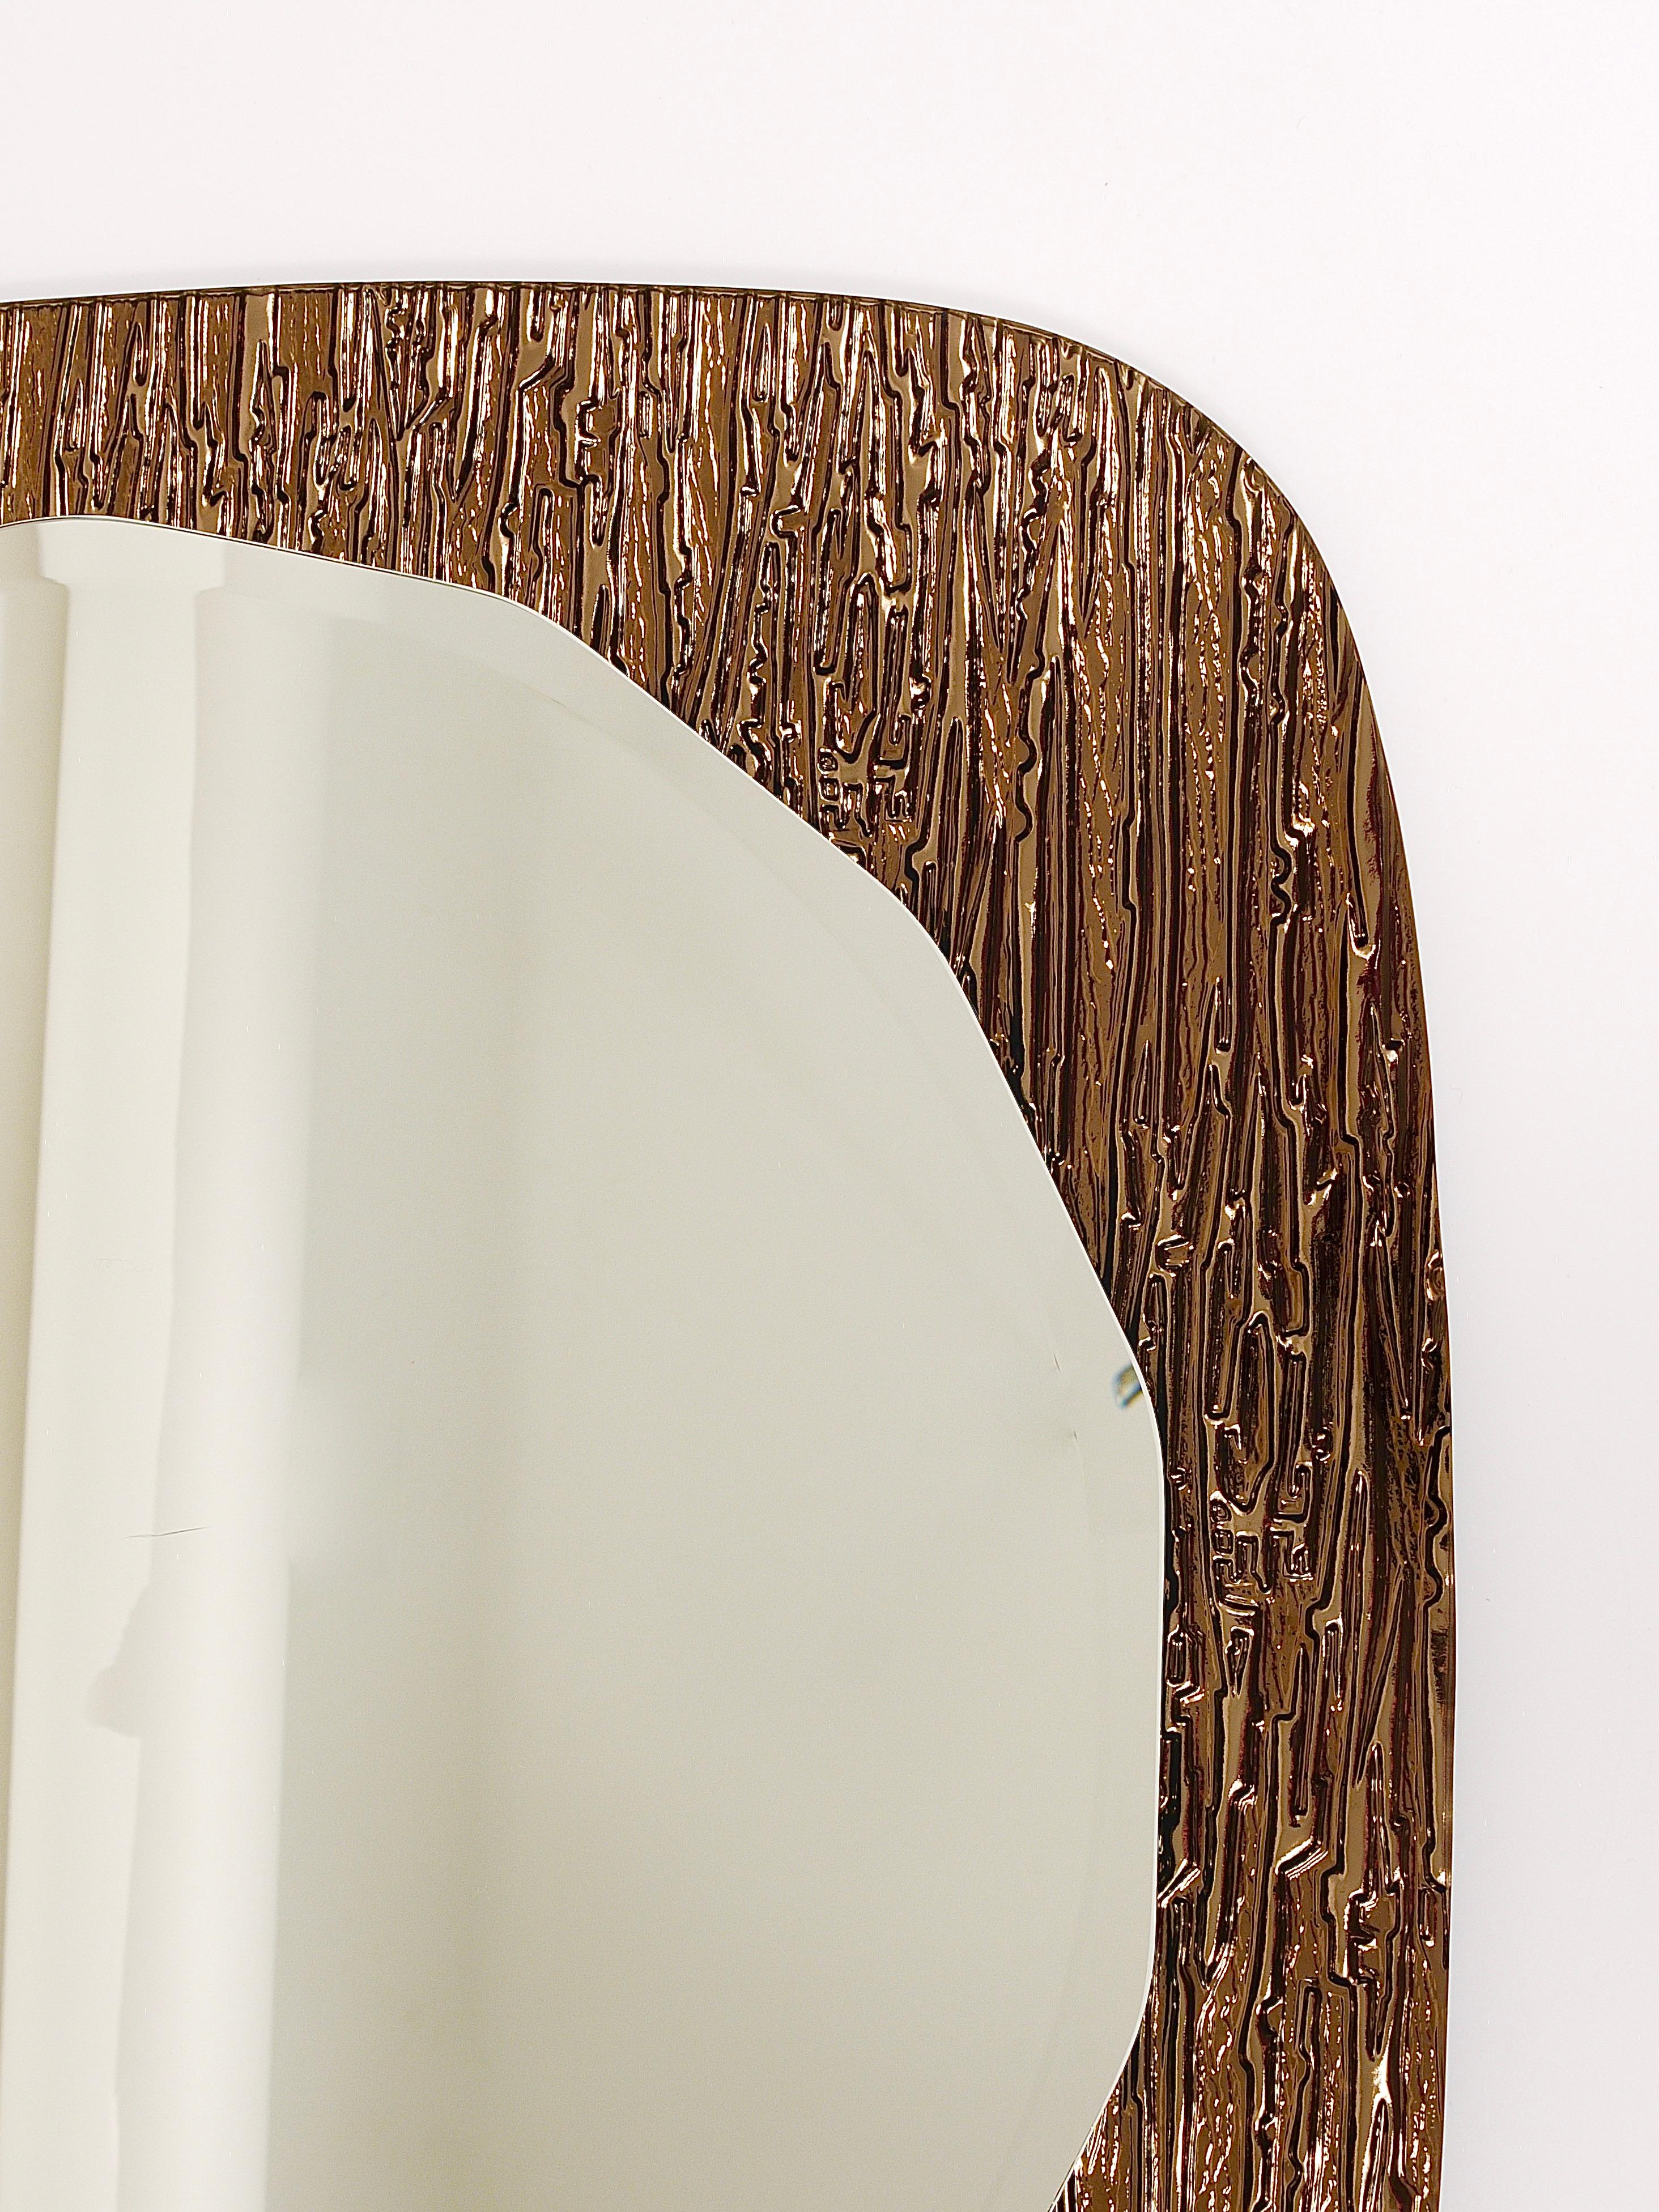 Cristal Arte Bronze Gold Scalloped Textured Midcentury Wall Mirror, Italy, 1960s For Sale 7